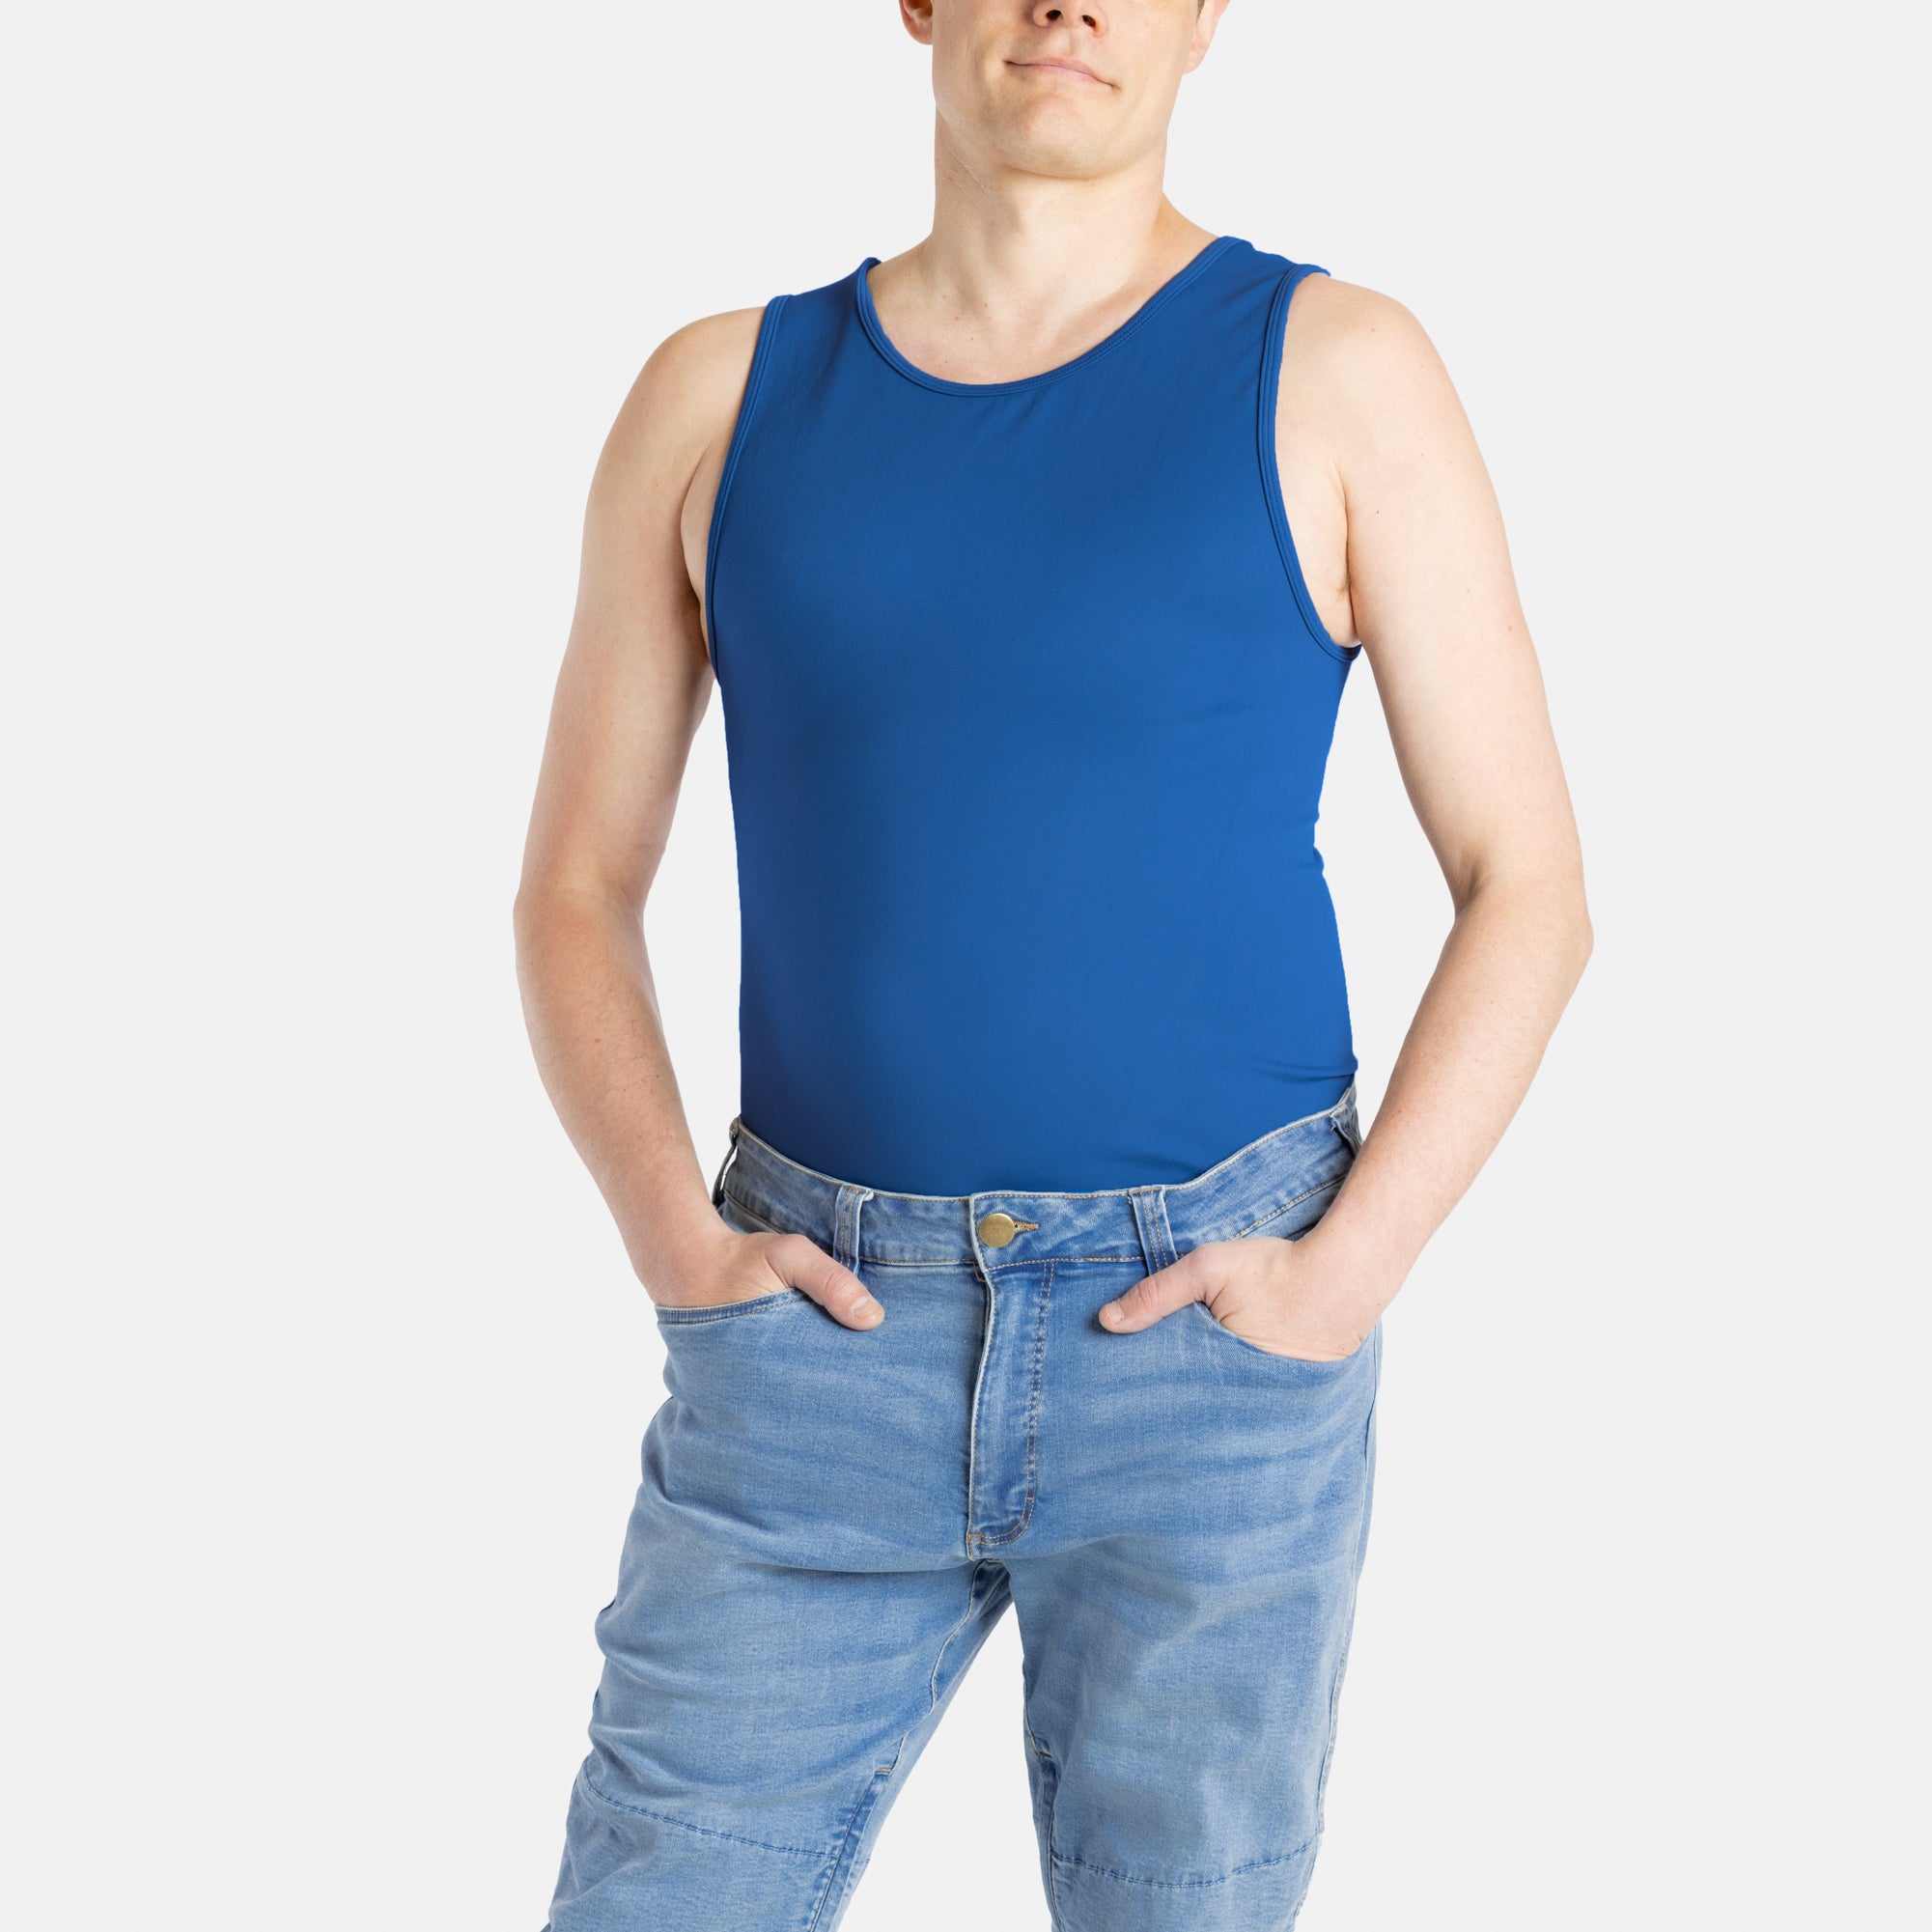 A white man with short brown hair wears a navy tank top and denim jeans.